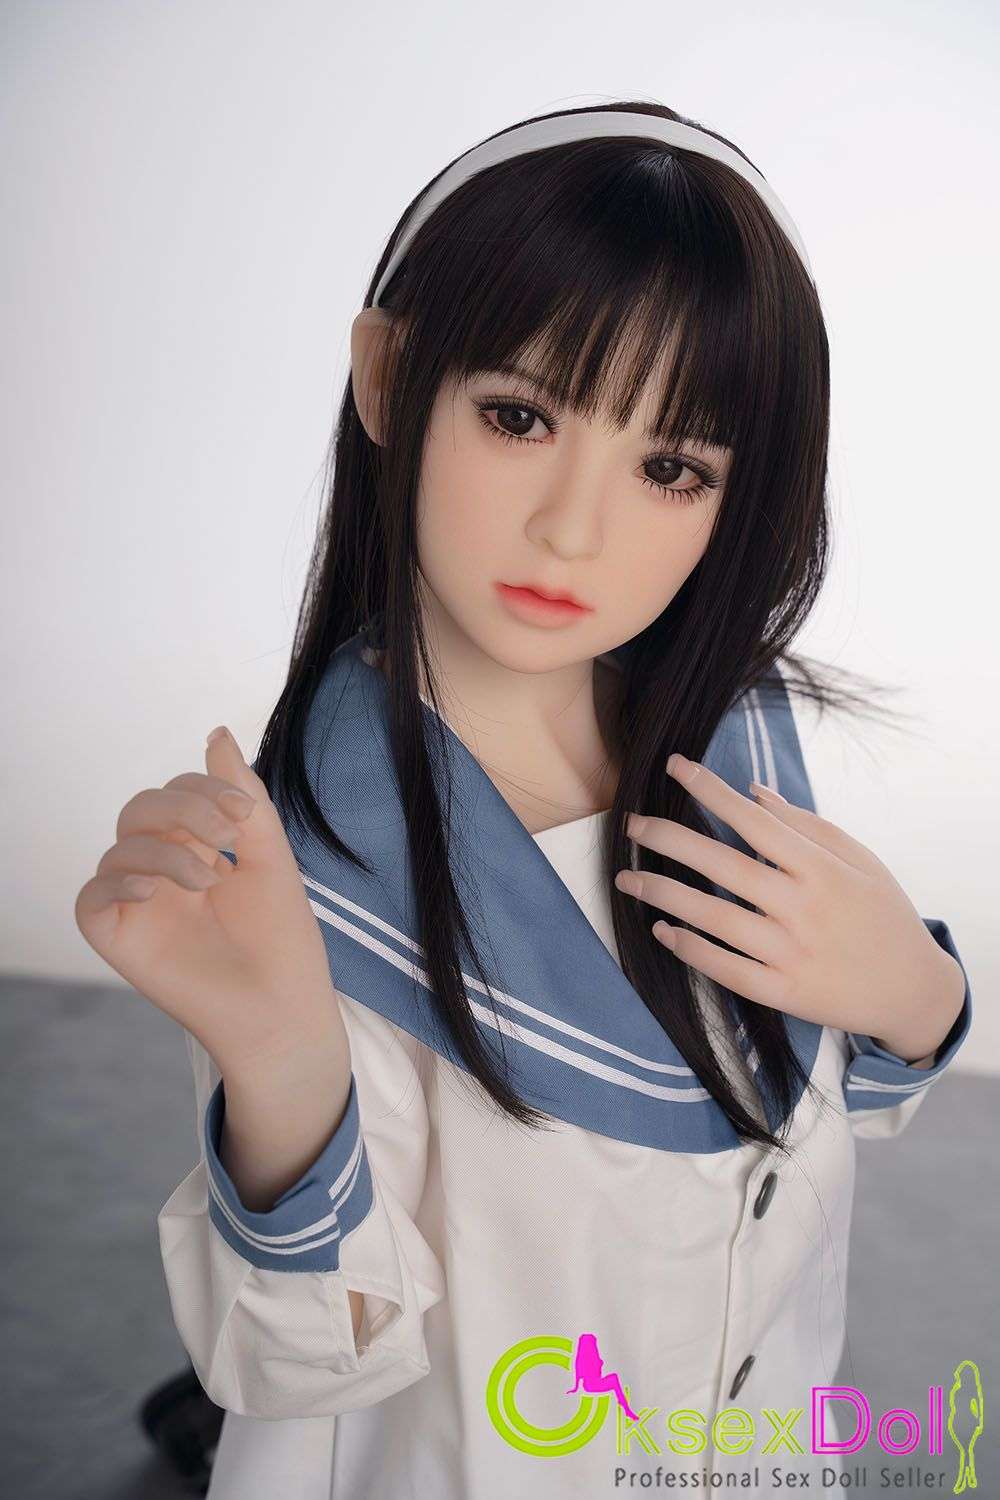 sex doll pics of Kyoko AXB 140cm B-cup Japanese Schoolgirl Sex Doll Picture